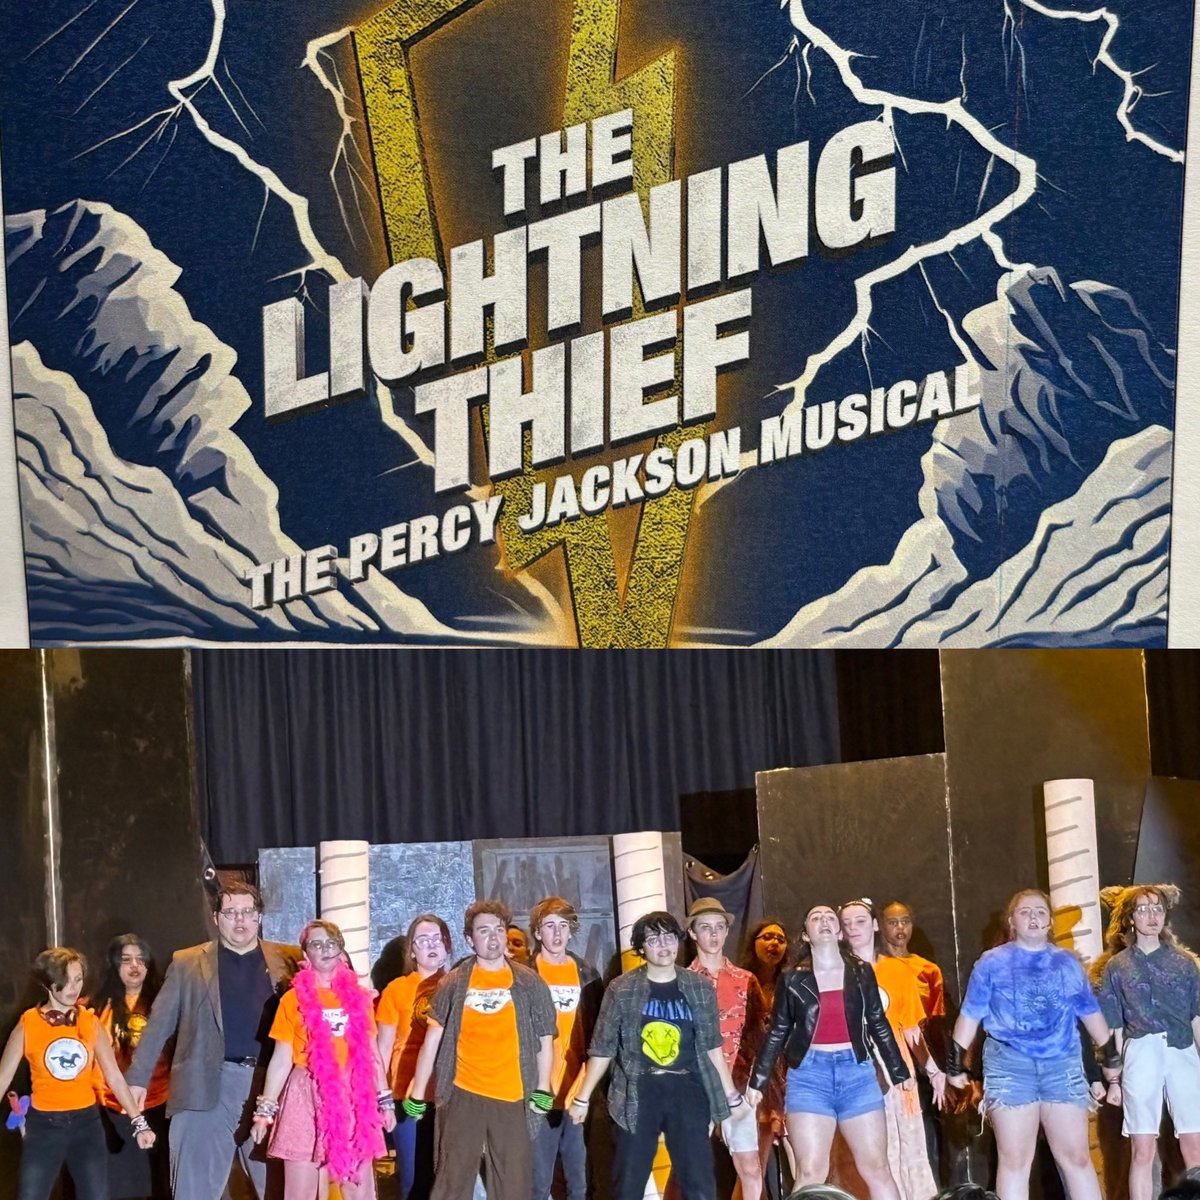 Congratulations to students and staff for the wonderful performance of The Lightning Thief musical tonight. Well done!@nccschool @alcdsb